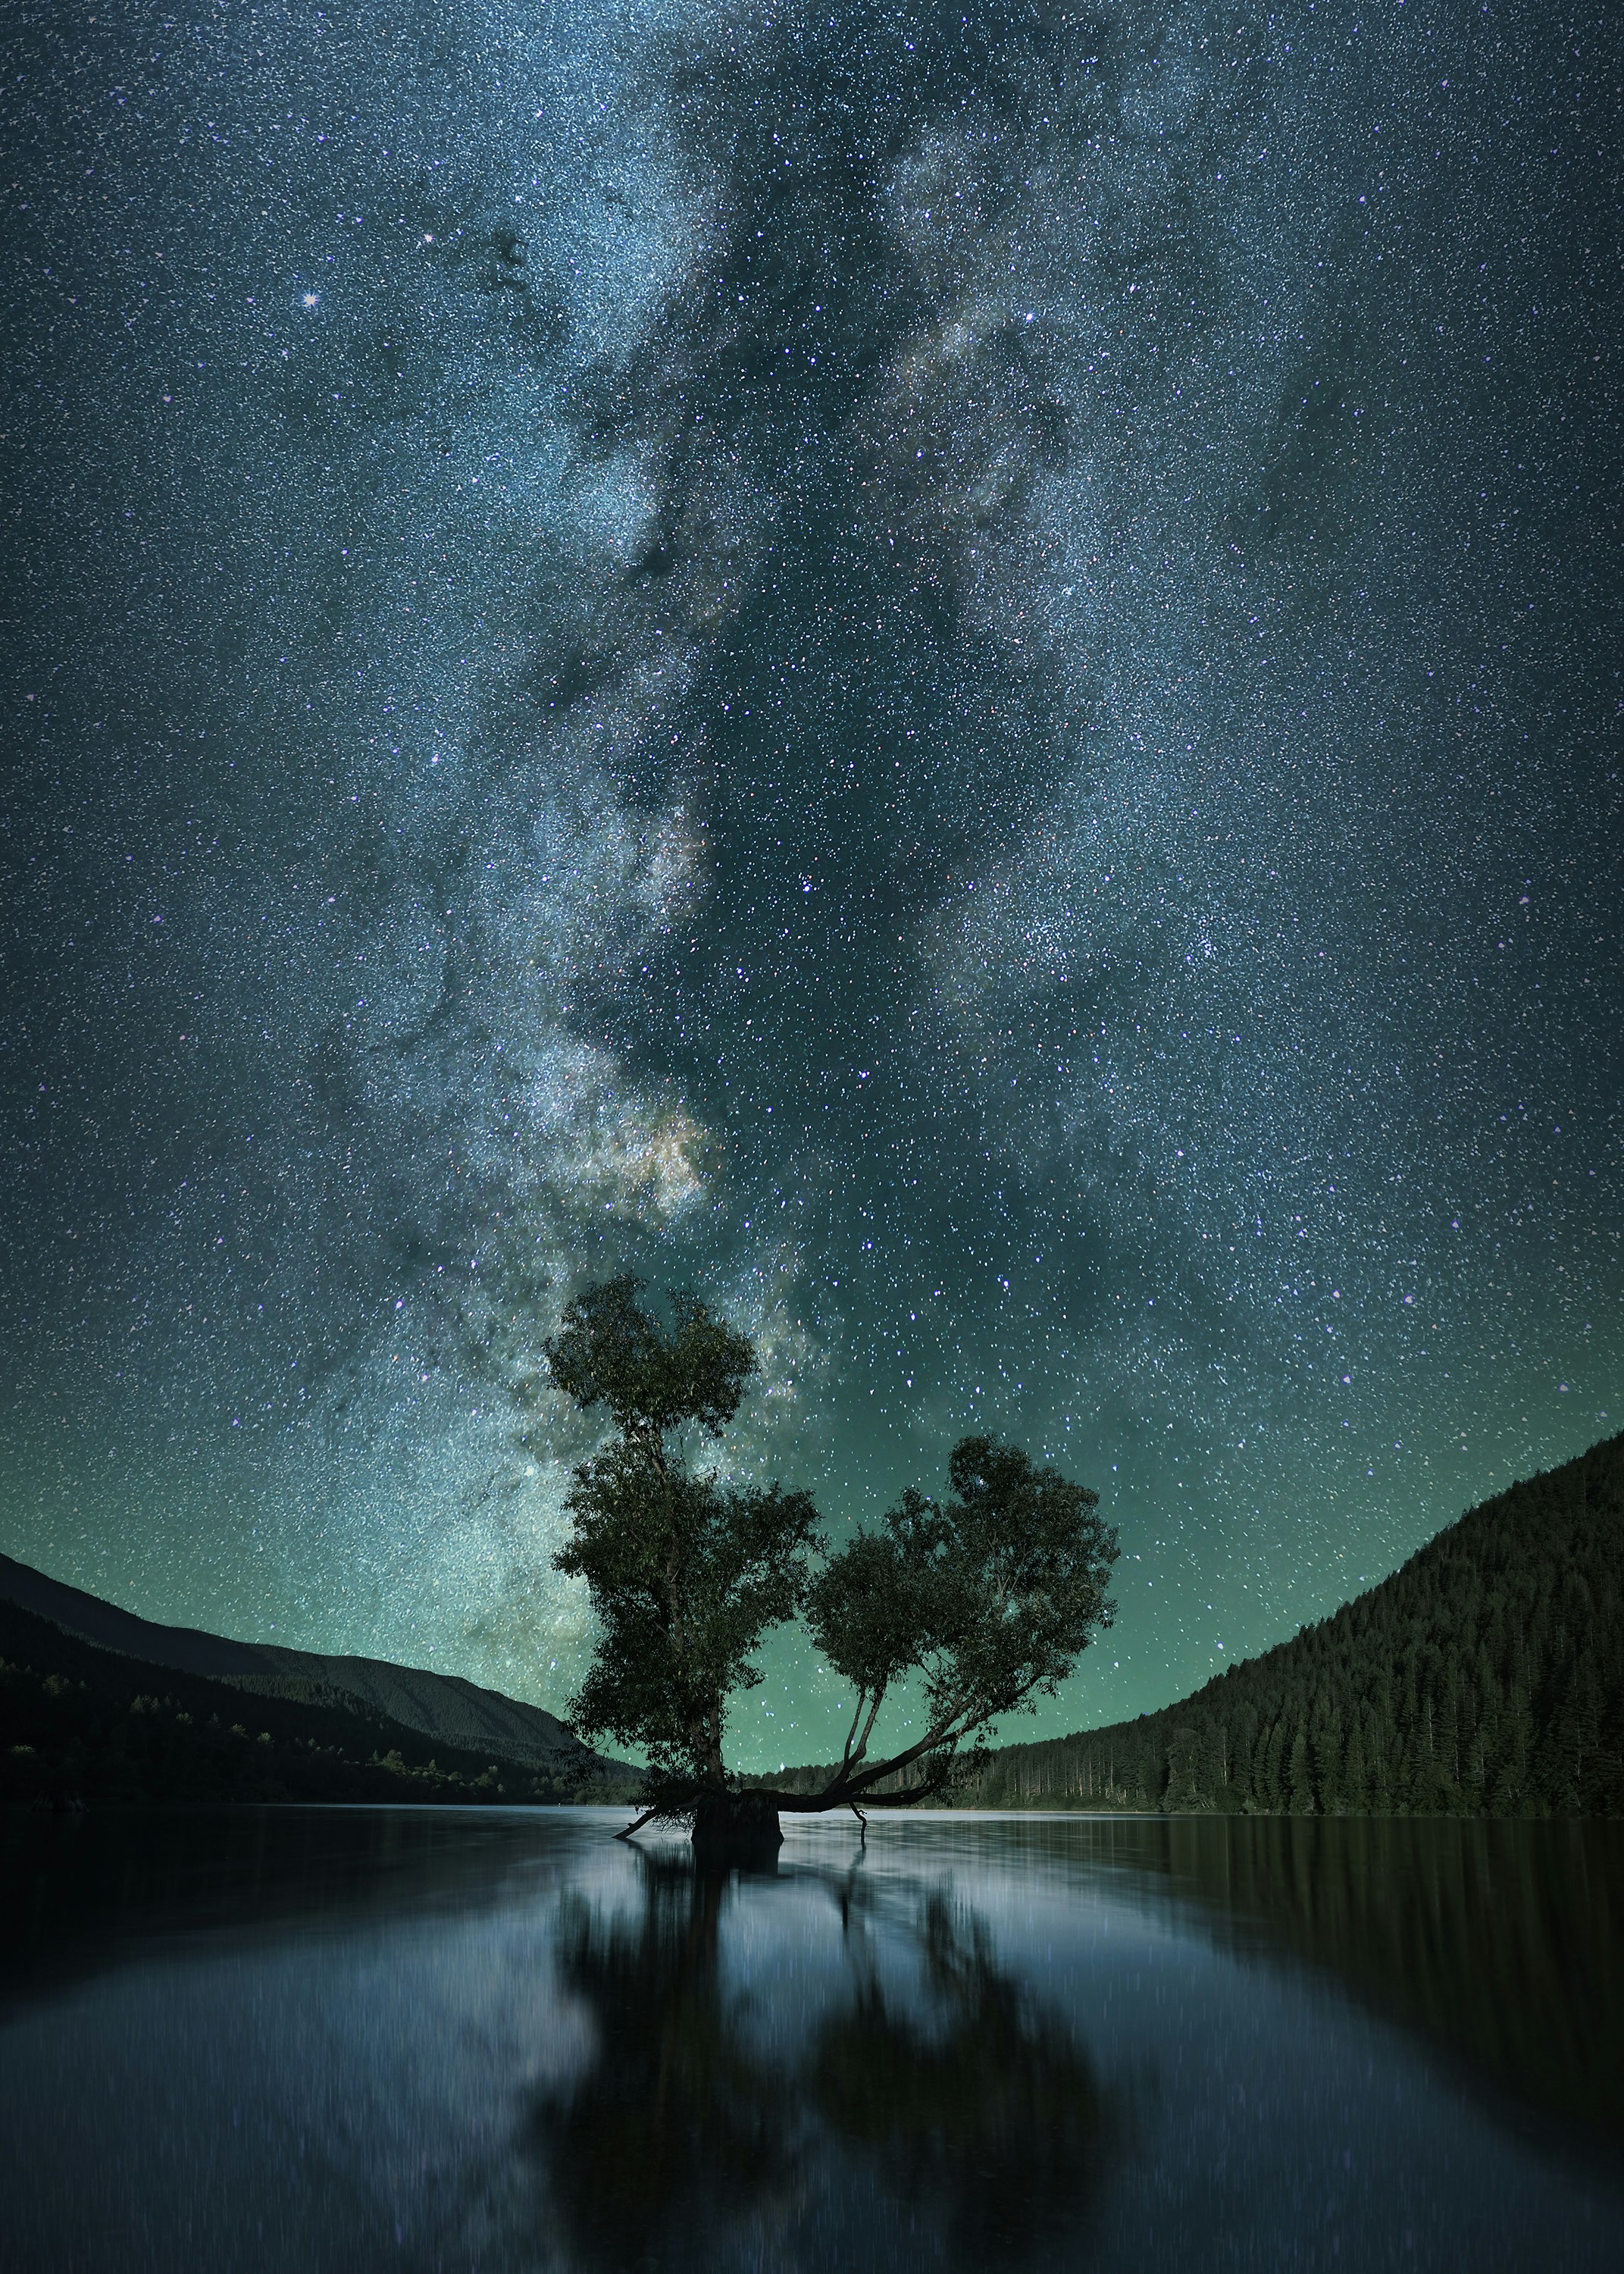 The Great Rift, also know as The Dark Rift, or The Dark River, is a section of non-luminous clouds within the Milky Way. I paired this section of the milky way with a lonely tree for a heavier mood. 
s: 2x2x3 tracked/stacked panorama - 50mm @ f2.8, ISO1600, 120s
fg: 20mm @ f11, ISO100, 5s (hoya nd1000x)